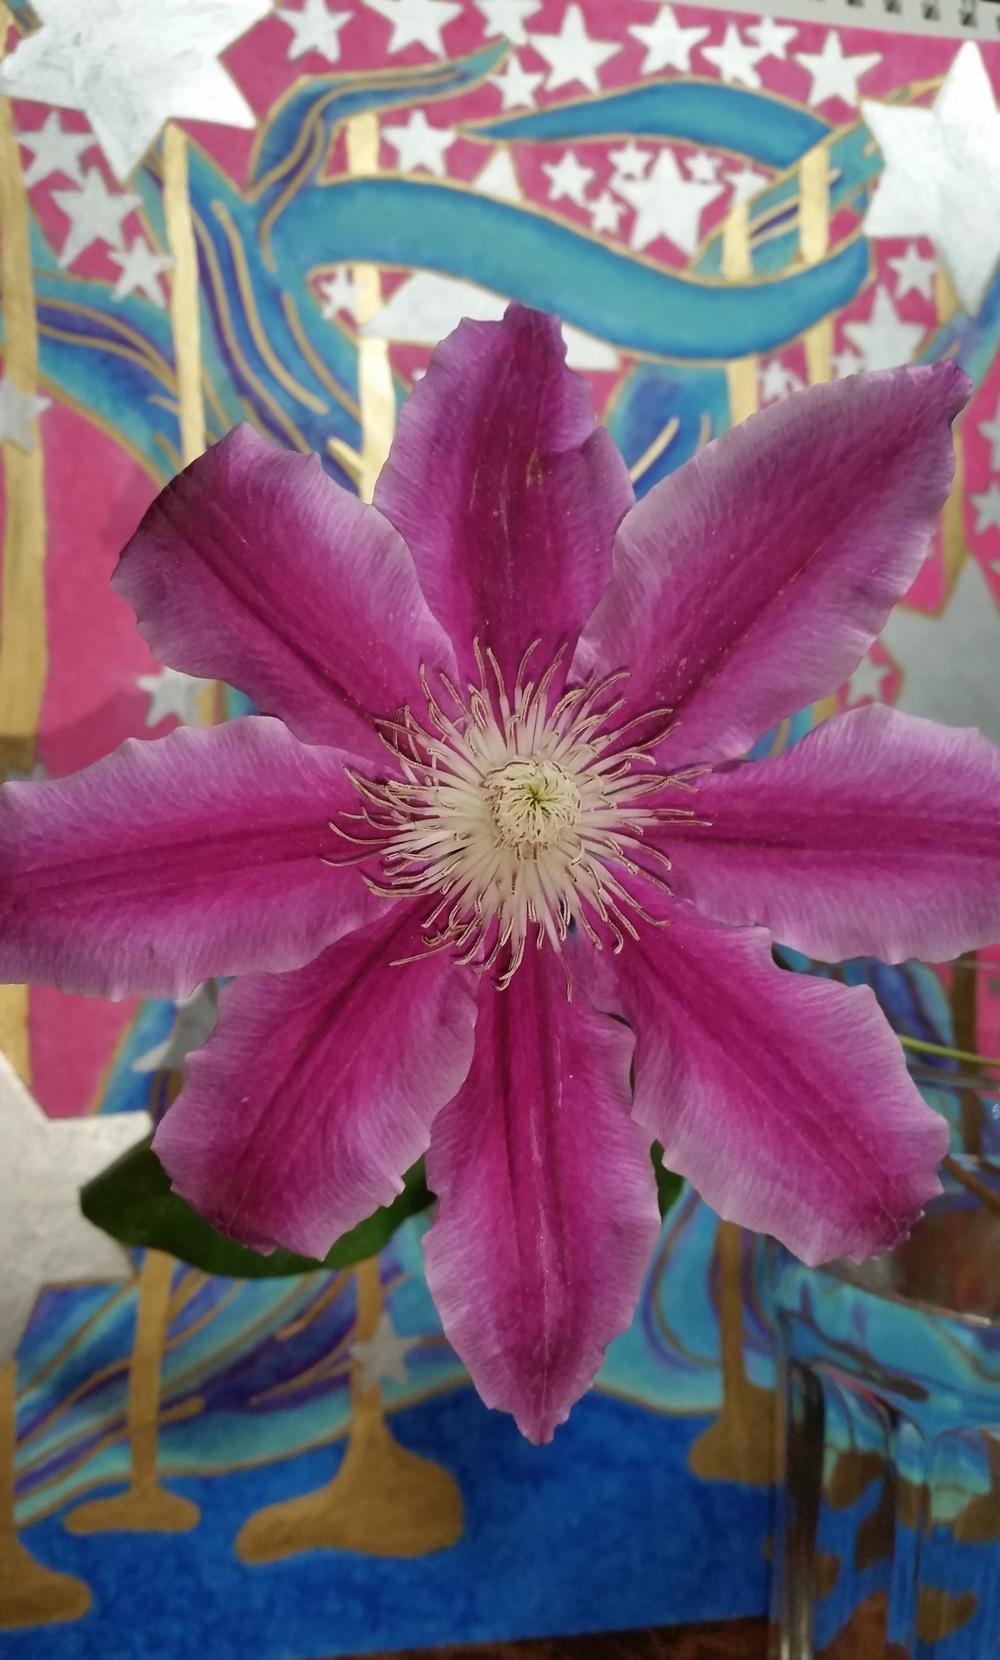 Photo of Clematis uploaded by QueenDreama